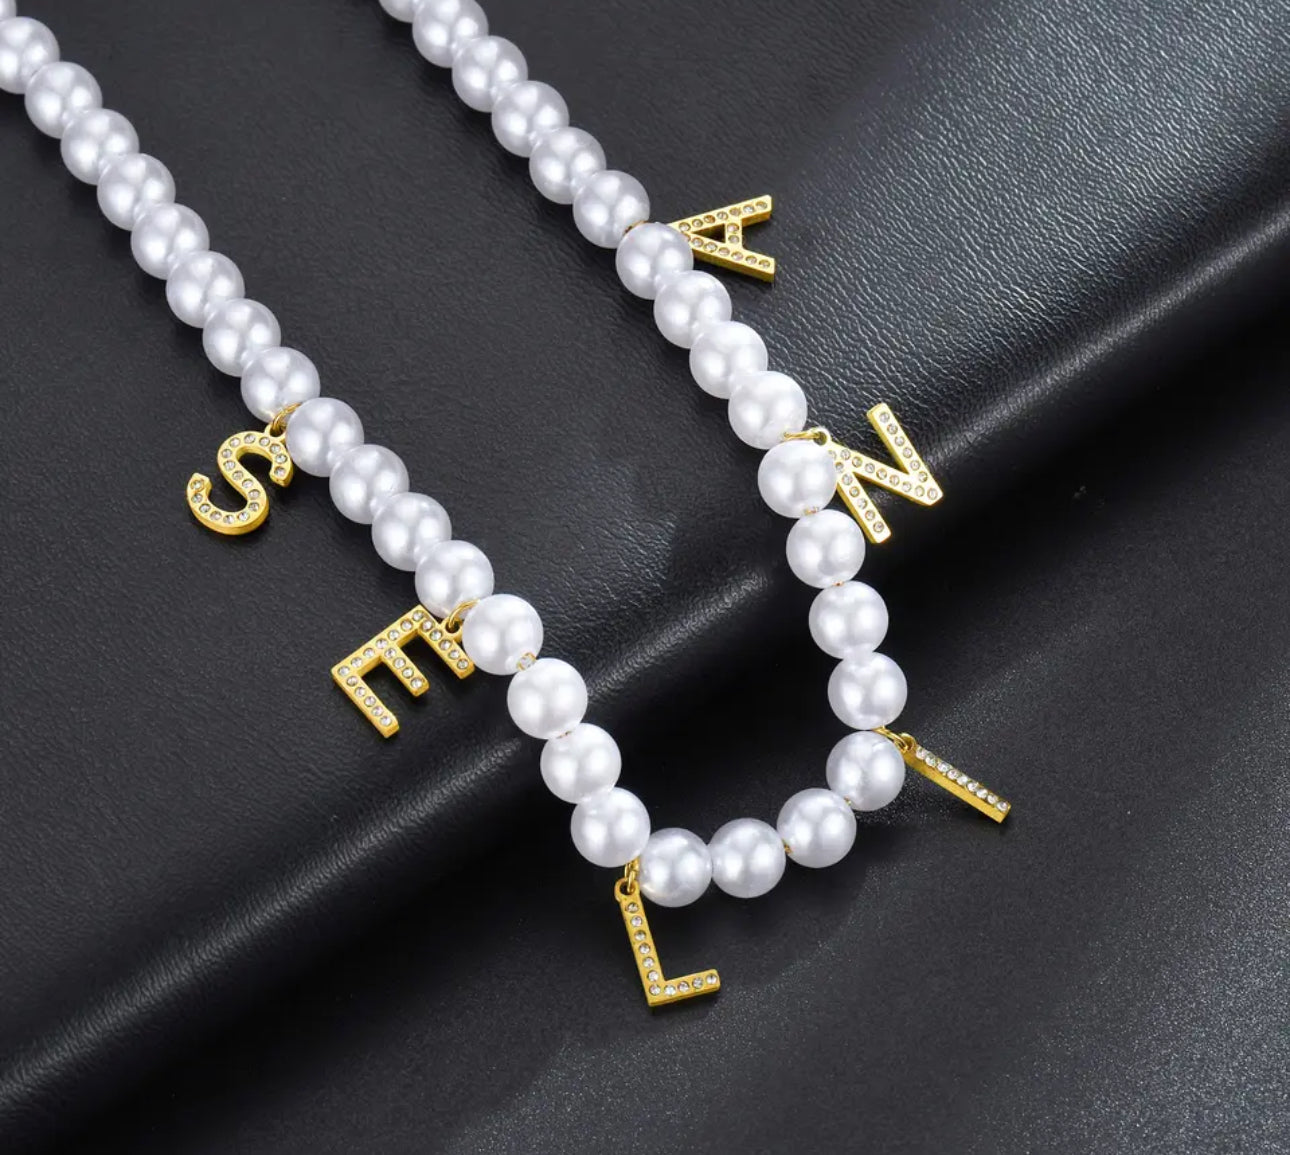 Pearl name necklace